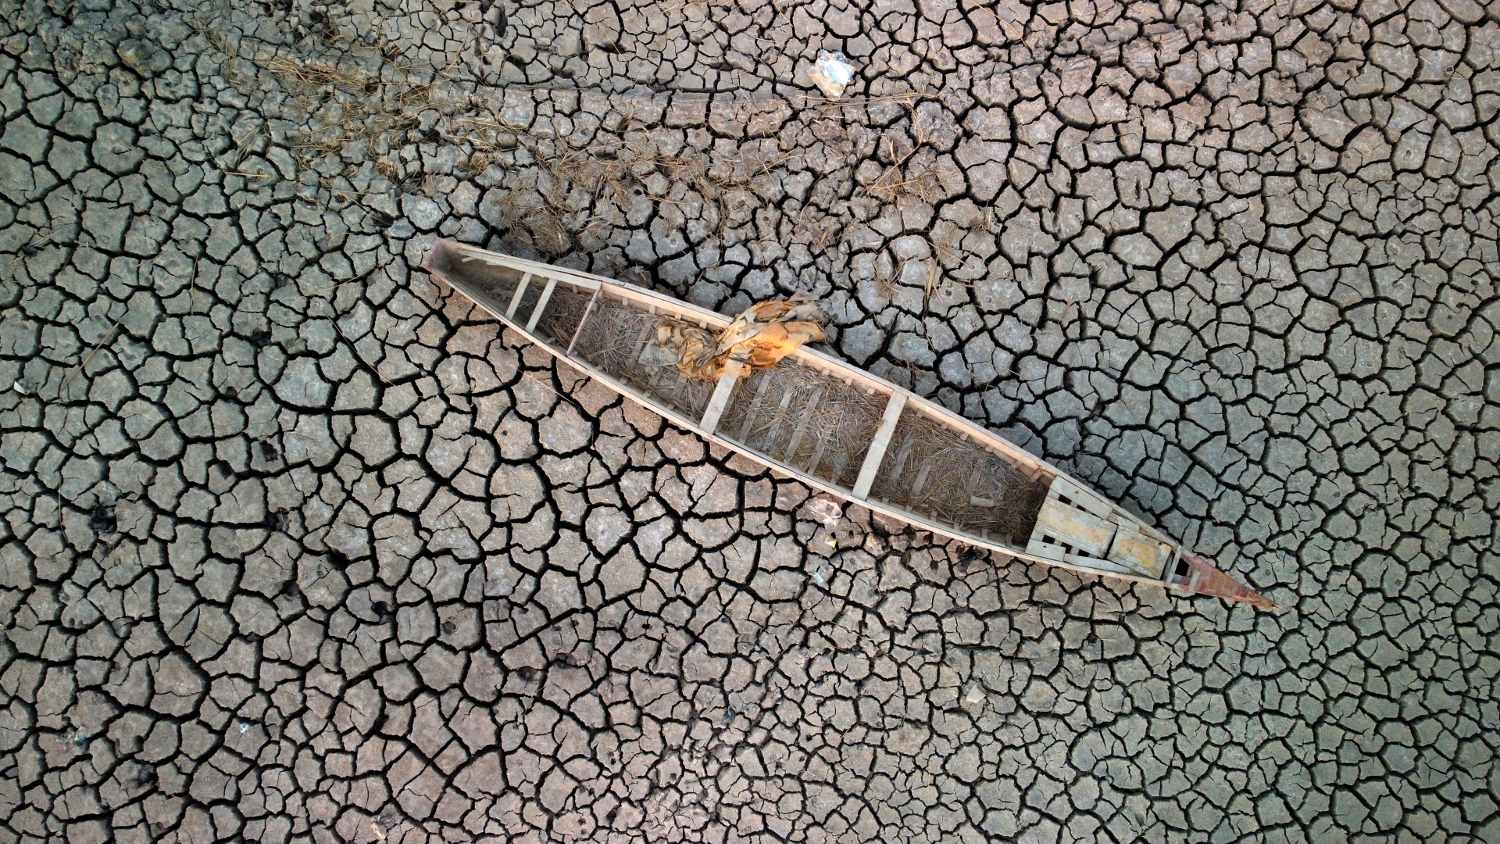 A boat on the dried-up bed of a section of Iraq's receding southern marshes of Chibayish in Dhi Qar province on 24 July 2022.